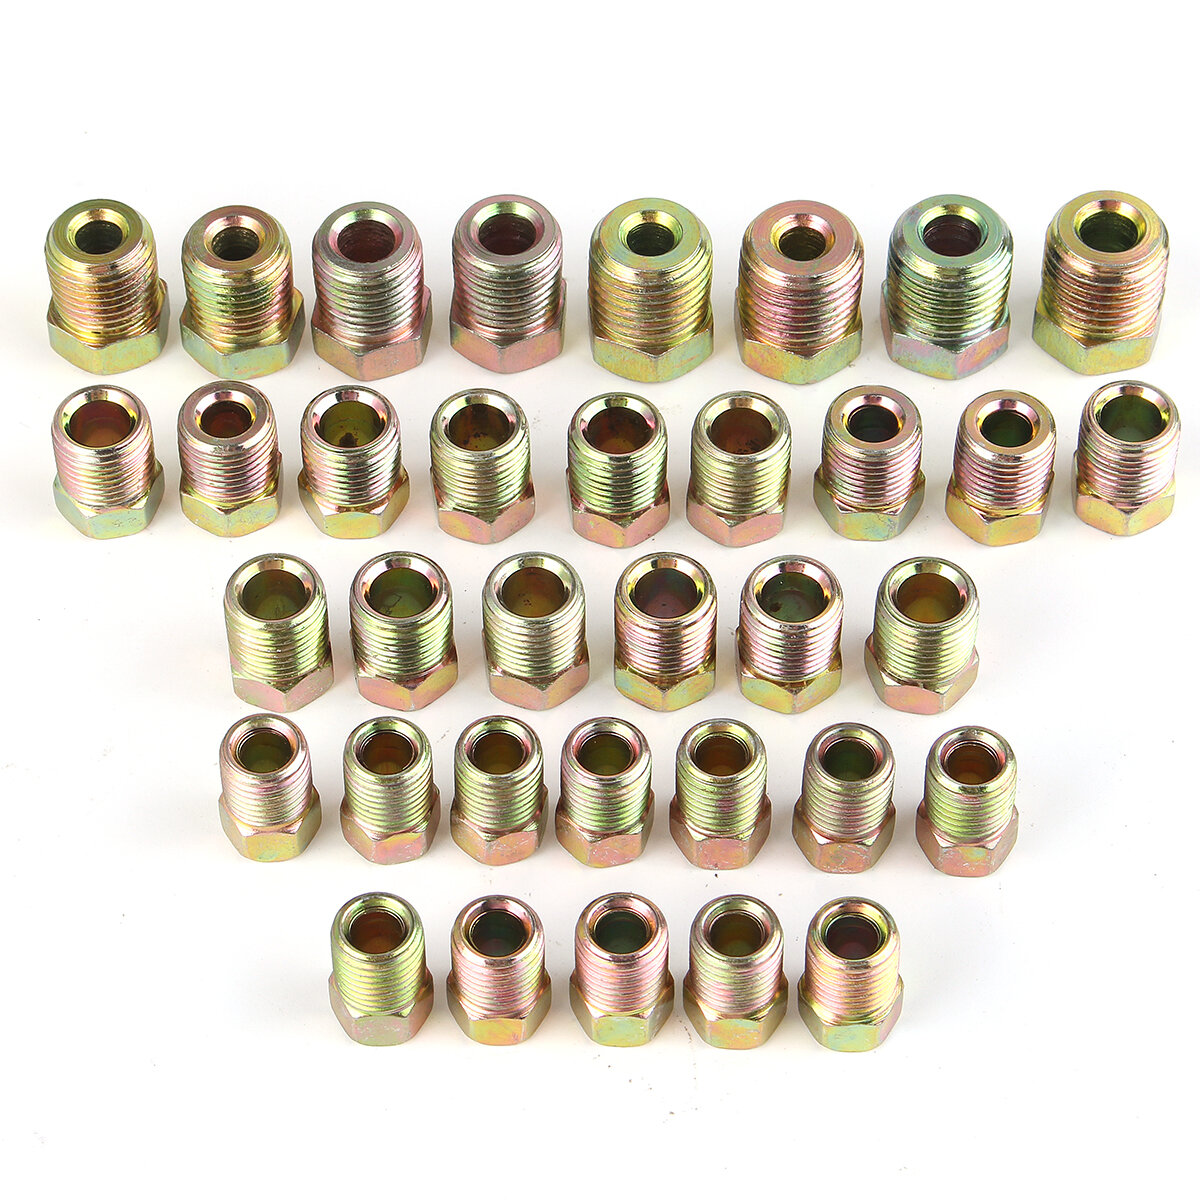 35PCS Brake Line Tube Fitting Kit Nuts For Inverted Flares 3/16'' and 1/4'' Zinc